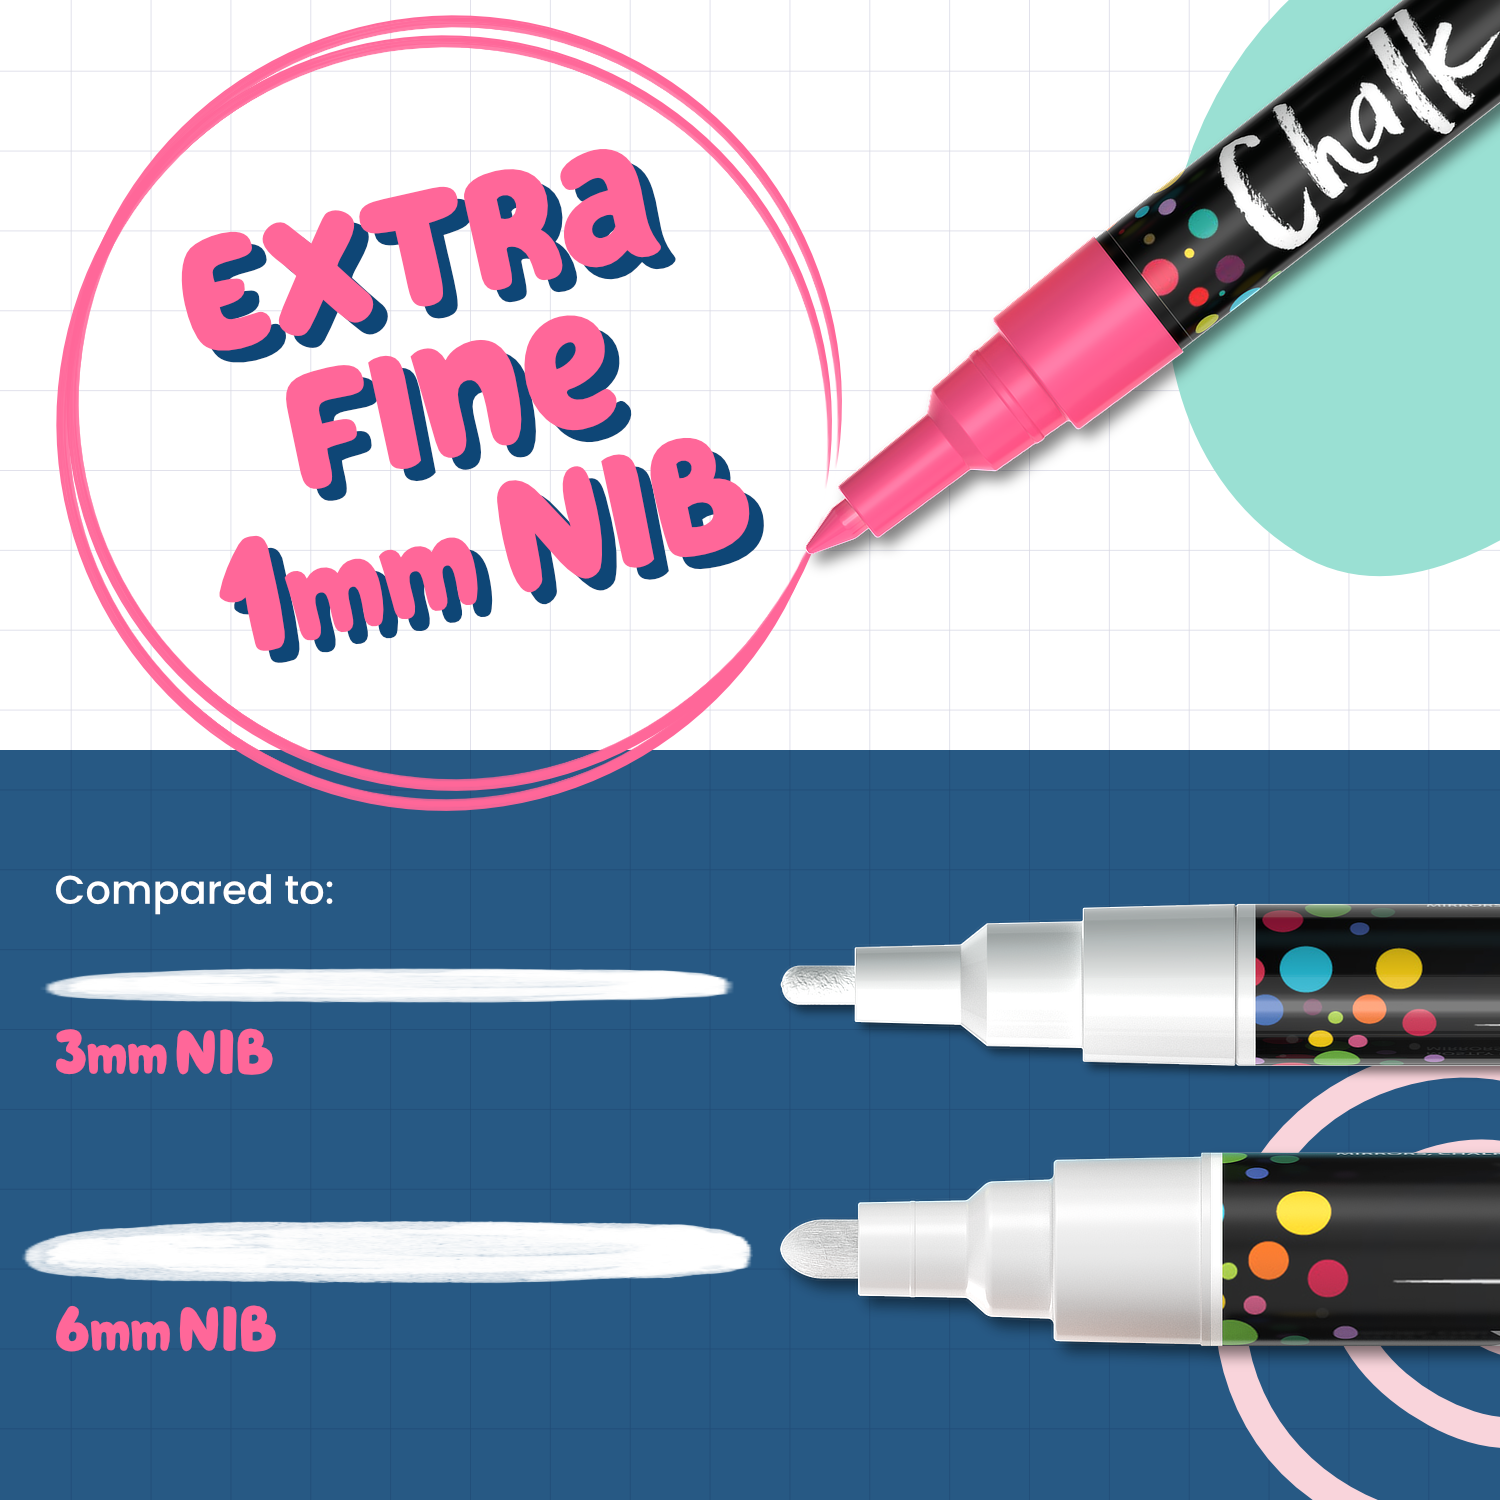 Neon Chalk Markers with 1mm Extra Fine Nib - Pack of 10 - Chalkola Art  Supply